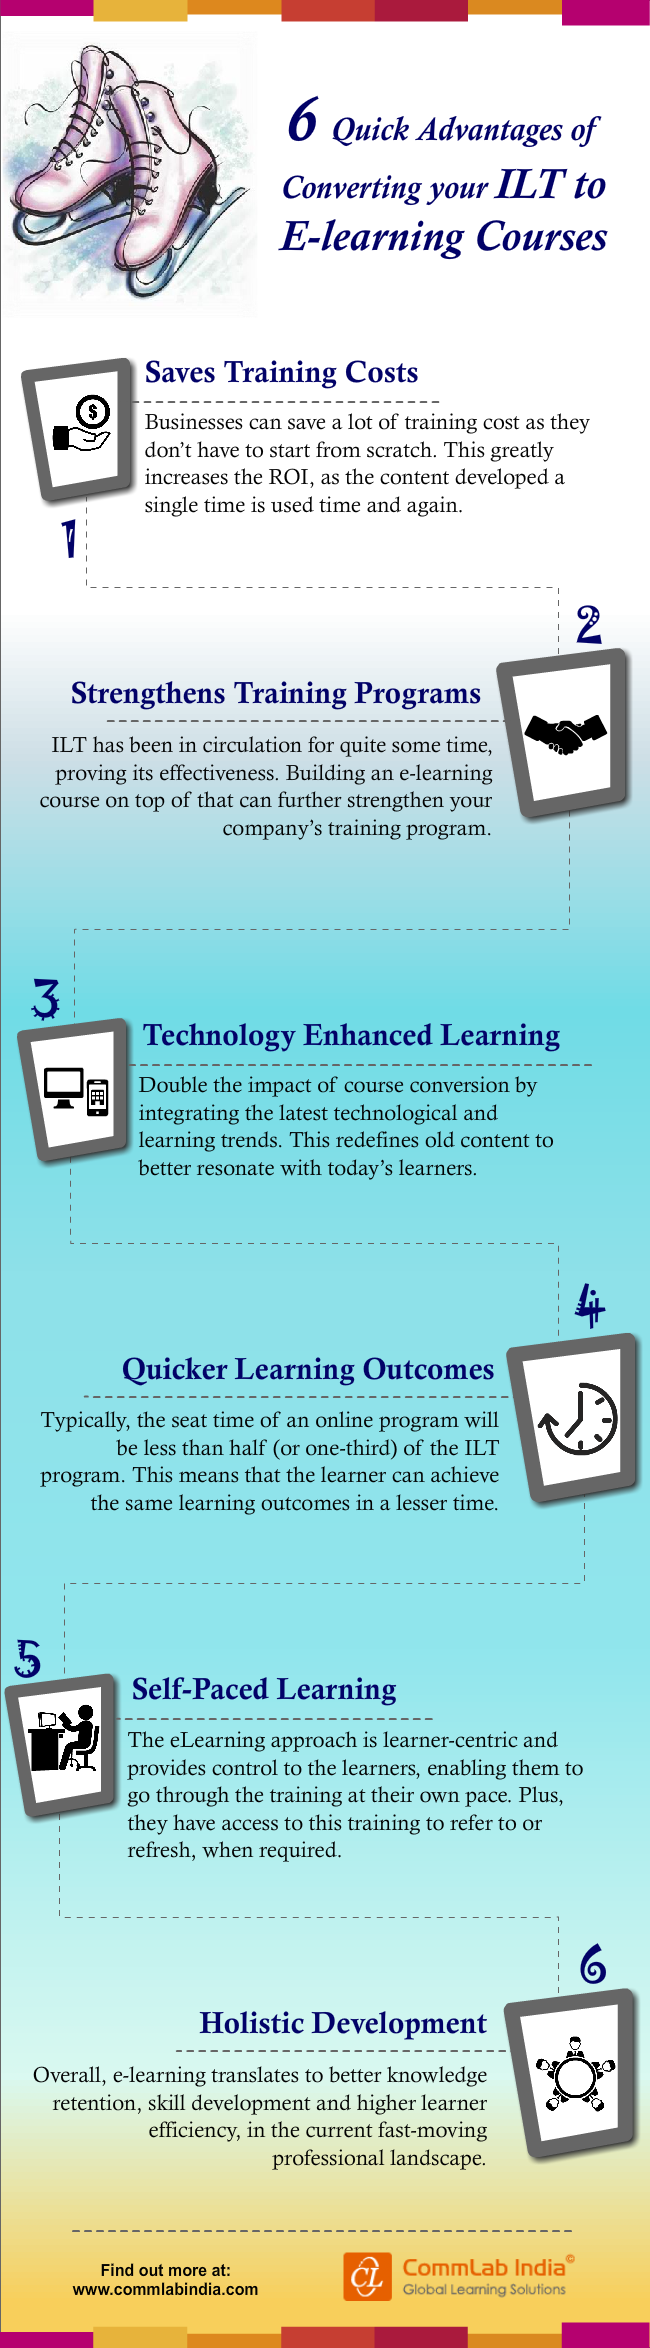 6 Quick Advantages of Converting Your ILT to E-learning Courses [Infographic]